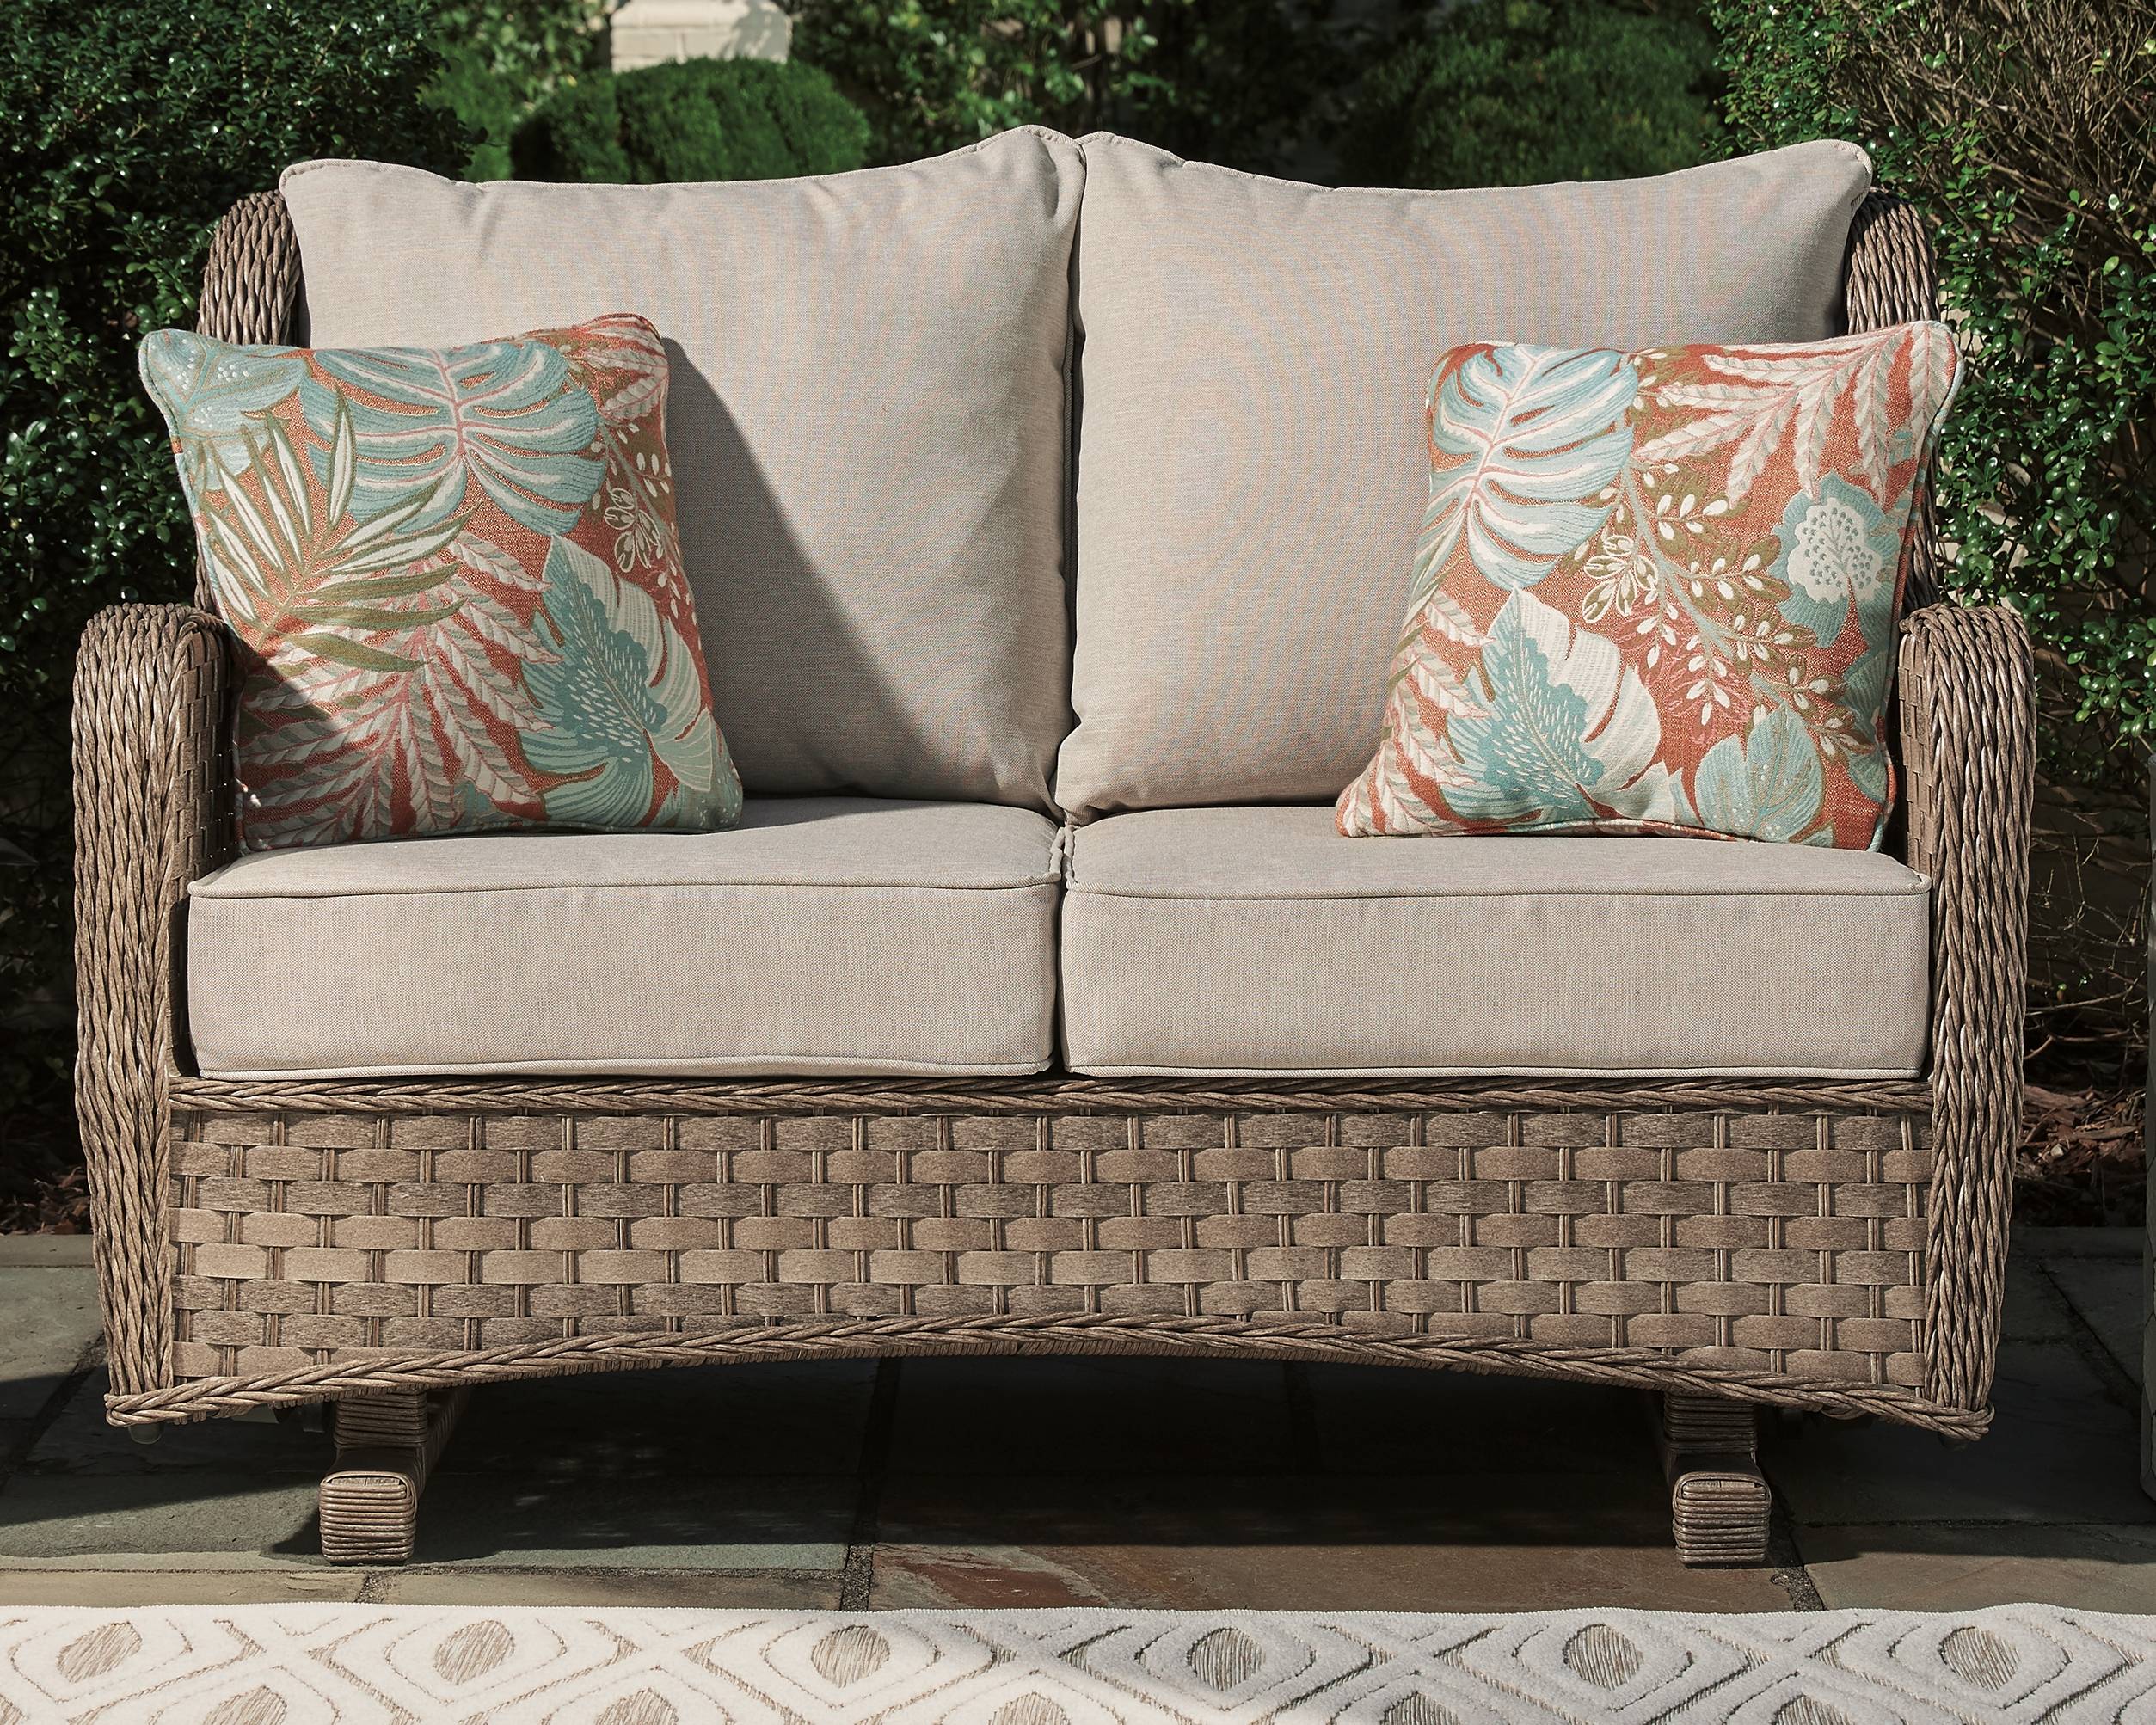 A woven wicker outdoor loveseat sits on patio in front of a wall of greenery. Two grey cushions support two orange floral outdoor pillows on either side of the sofa.